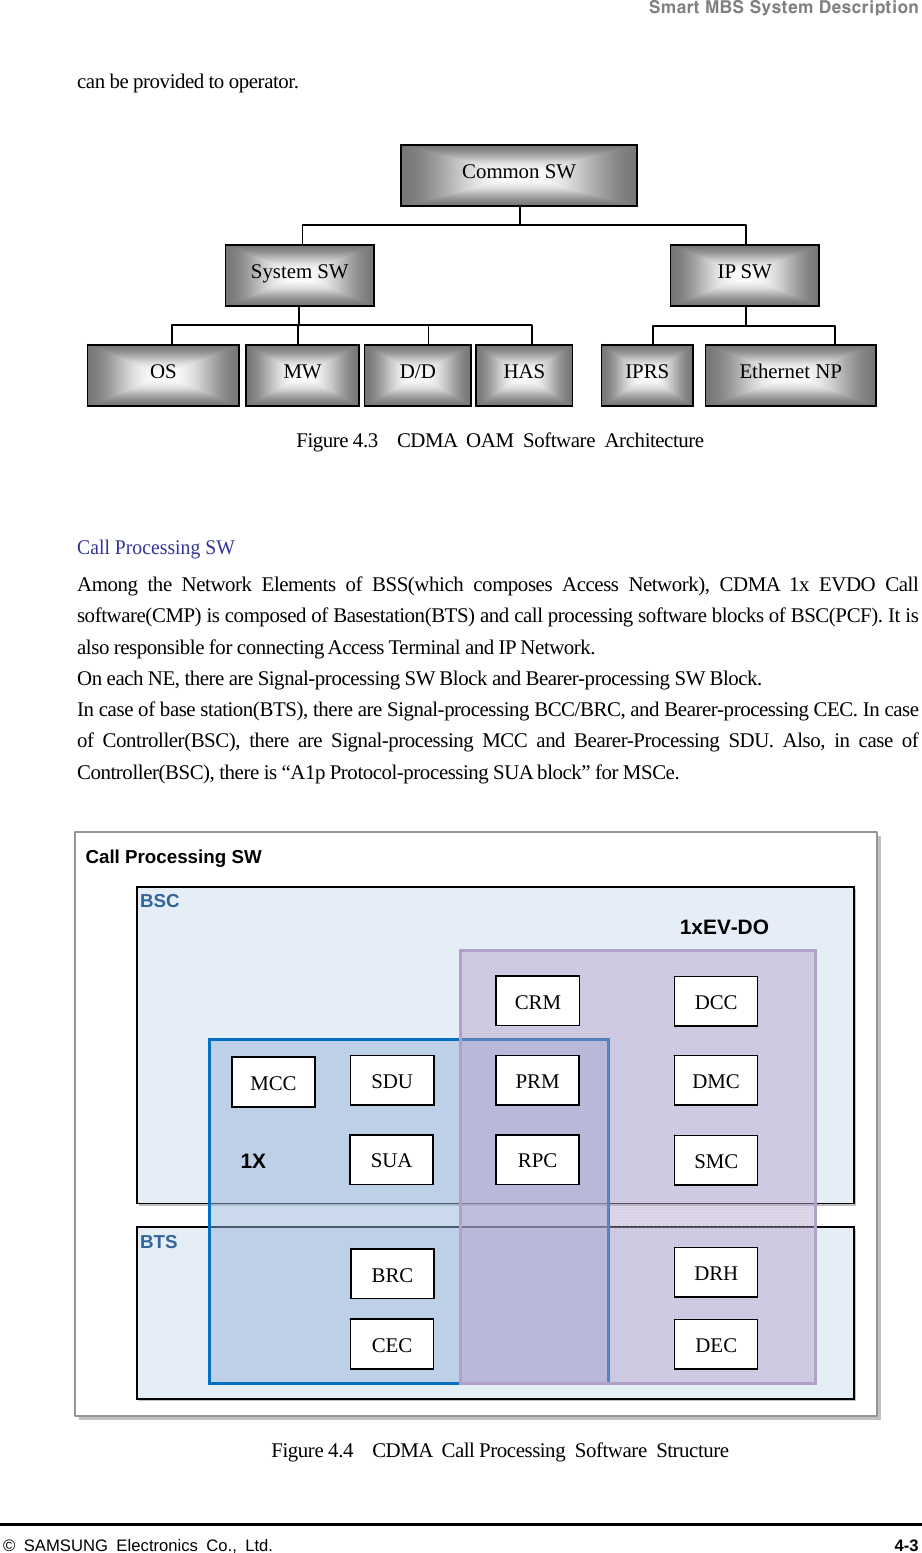  Smart MBS System Description © SAMSUNG Electronics Co., Ltd.  4-3 can be provided to operator.  Figure 4.3  CDMA OAM Software Architecture   Call Processing SW Among the Network Elements of BSS(which composes Access Network), CDMA 1x EVDO Call software(CMP) is composed of Basestation(BTS) and call processing software blocks of BSC(PCF). It is also responsible for connecting Access Terminal and IP Network. On each NE, there are Signal-processing SW Block and Bearer-processing SW Block. In case of base station(BTS), there are Signal-processing BCC/BRC, and Bearer-processing CEC. In case of Controller(BSC), there are Signal-processing MCC and Bearer-Processing SDU. Also, in case of Controller(BSC), there is “A1p Protocol-processing SUA block” for MSCe.  Figure 4.4  CDMA Call Processing Software Structure Common SW System SW  IP SW OS  MW  D/D  IPRS  Ethernet NP HAS BSC Call Processing SW BTS MCC  SDU SUA DCC DMC CRMRPC  SMC PRM1xEV-DO 1X BRC CEC DRH DEC 